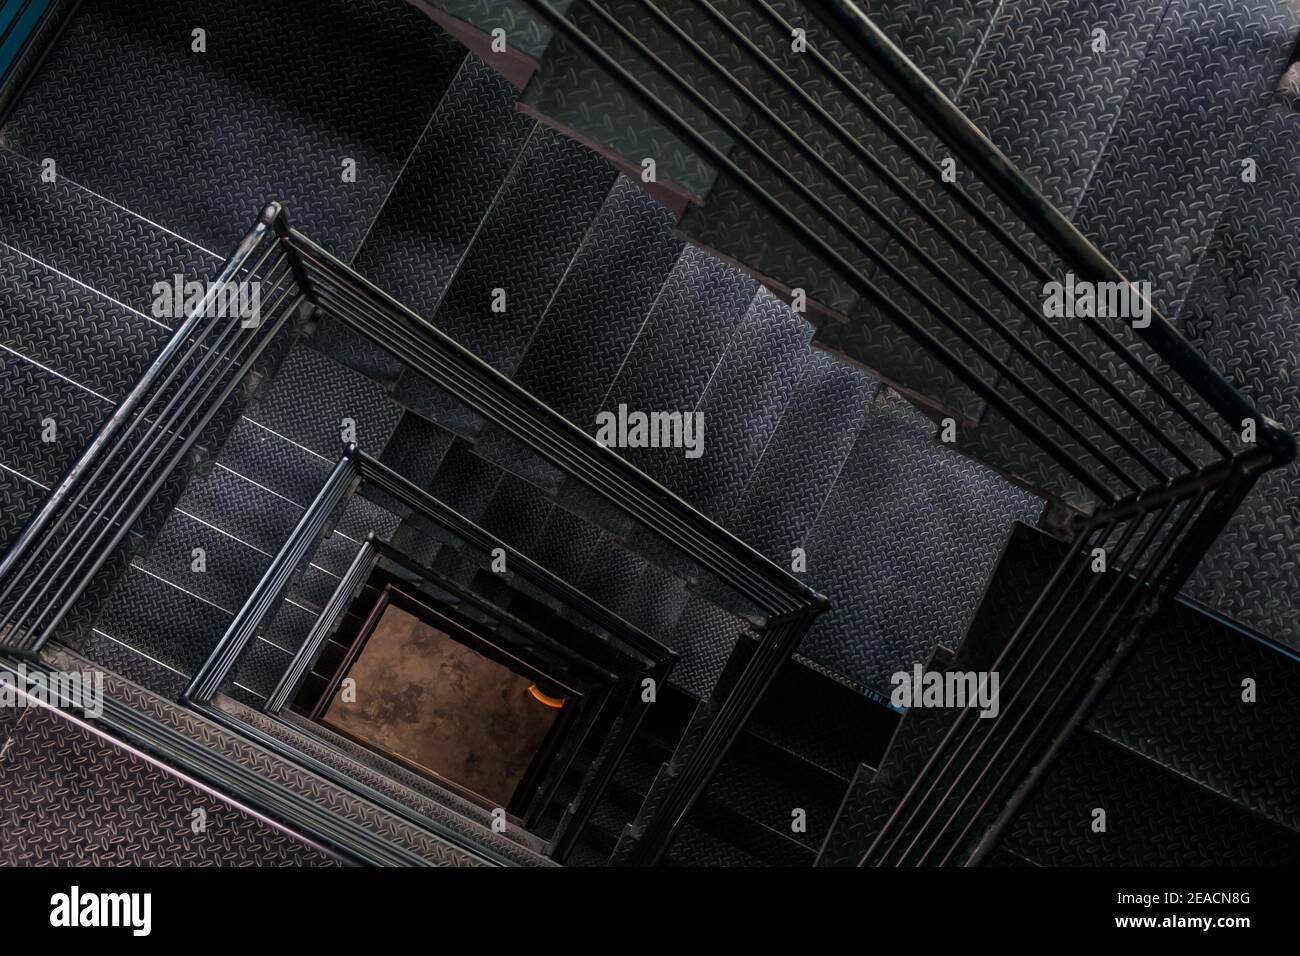 Square steel stairwell view from the top. Stock Photo